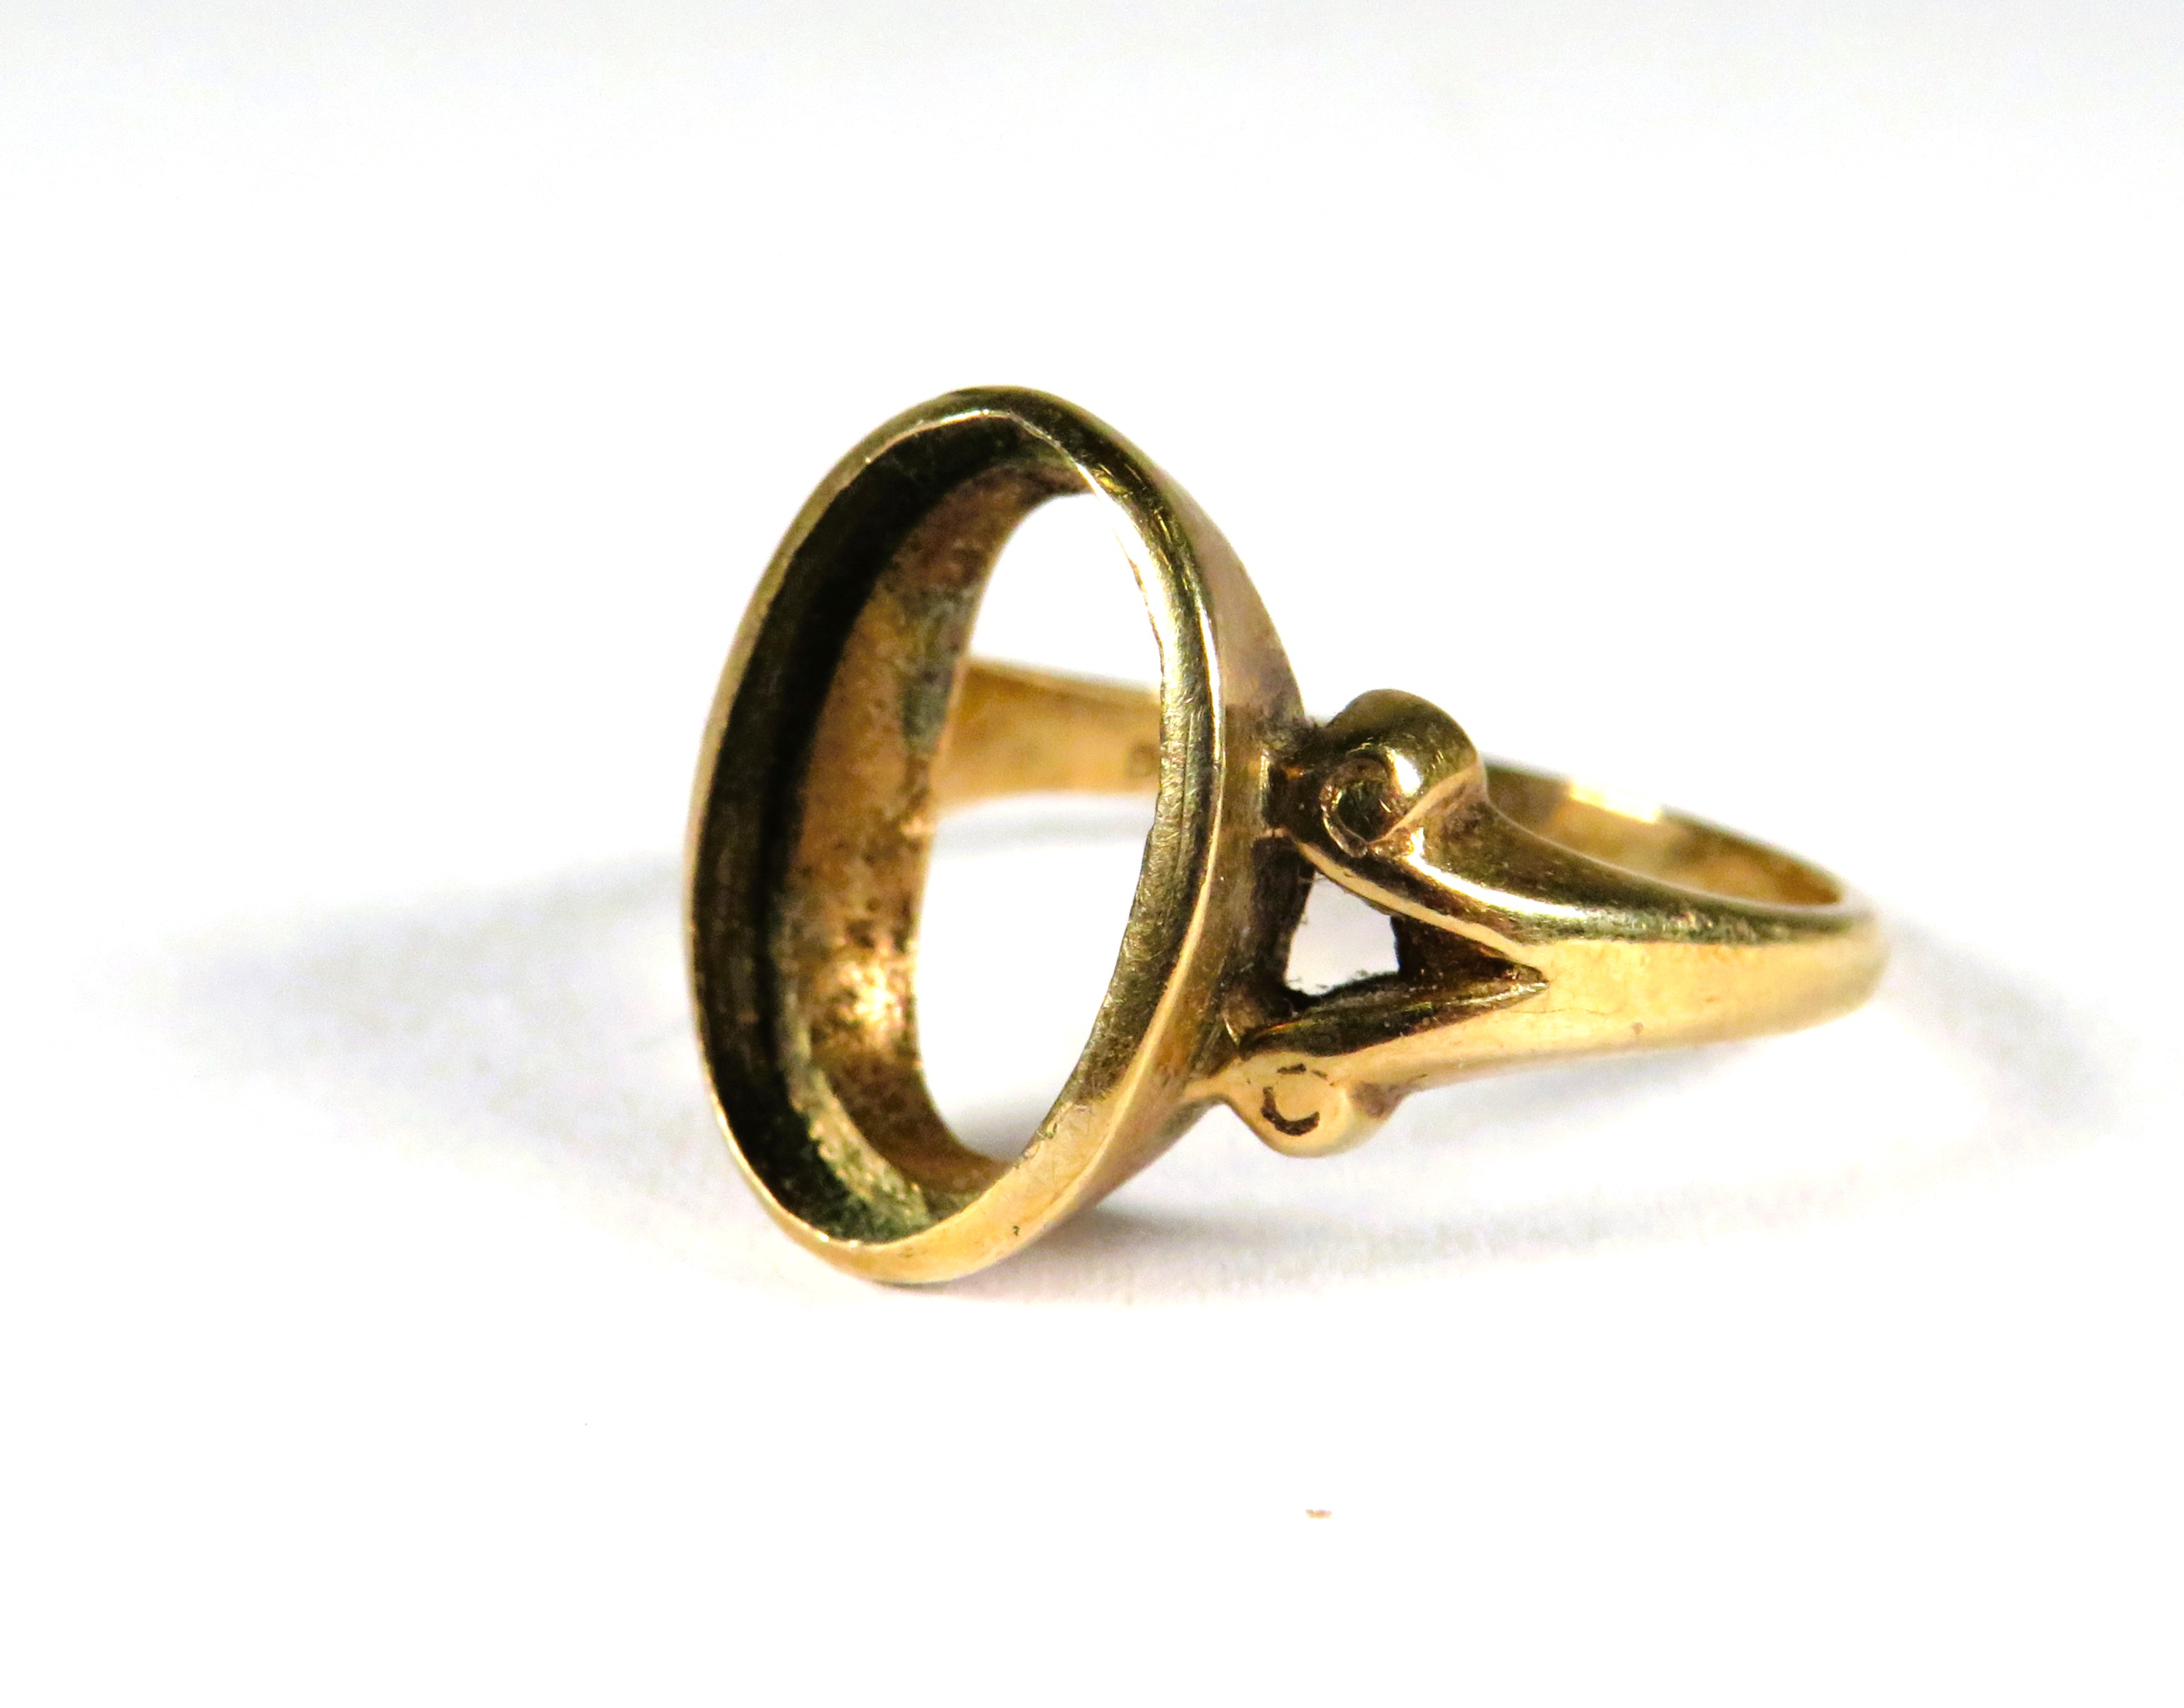 9ct Yellow Gold ring with Vacant mount, suitable for jeweller or project. Finger size 'N-5'  3.5g